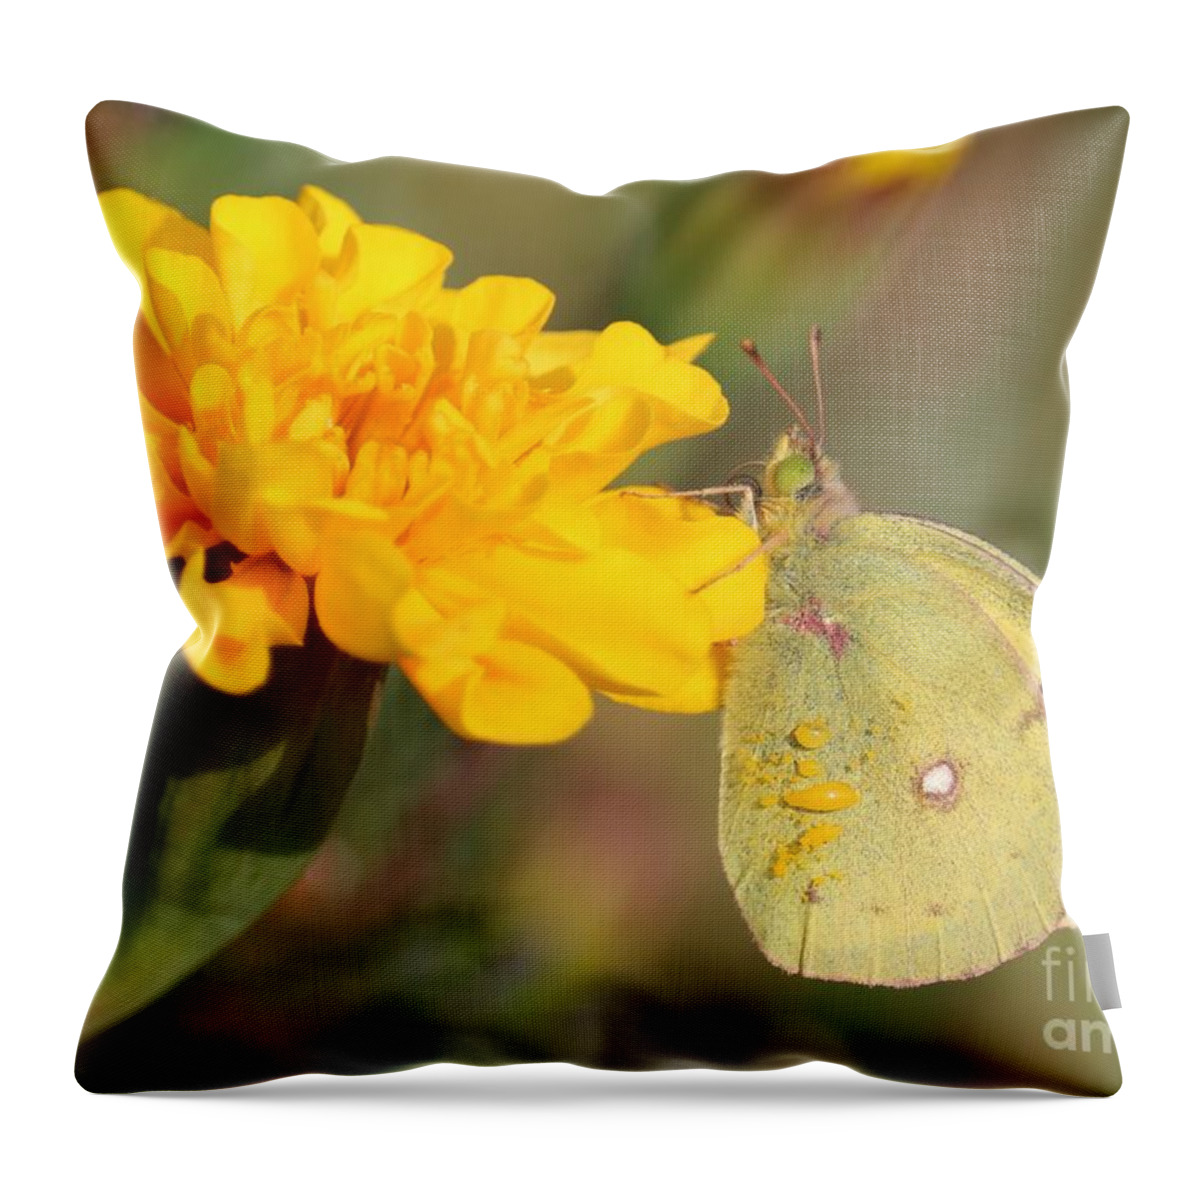 Marigold Throw Pillow featuring the photograph Moth on Marigold by Carol Groenen